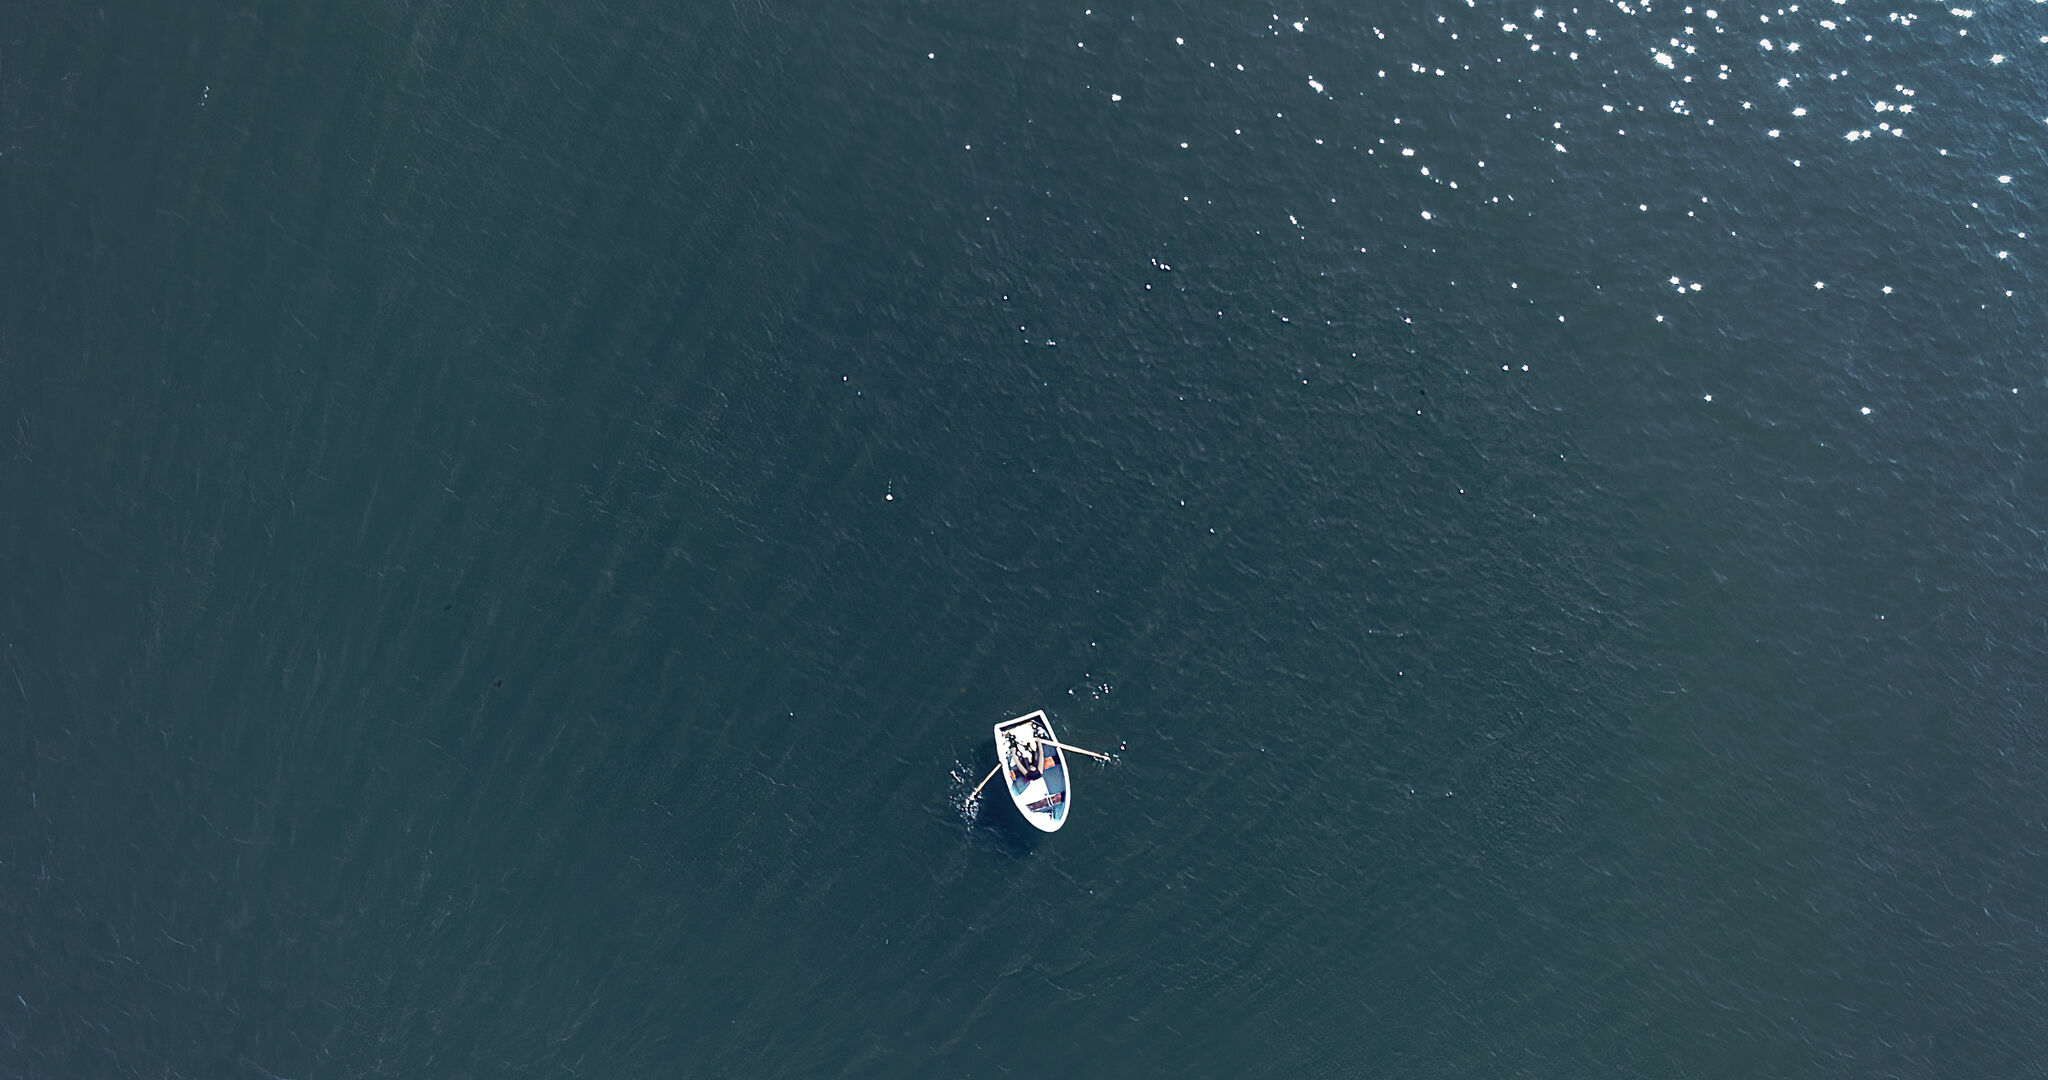 A small, white rowboat in the middle of an expansive, gray-blue body of water.